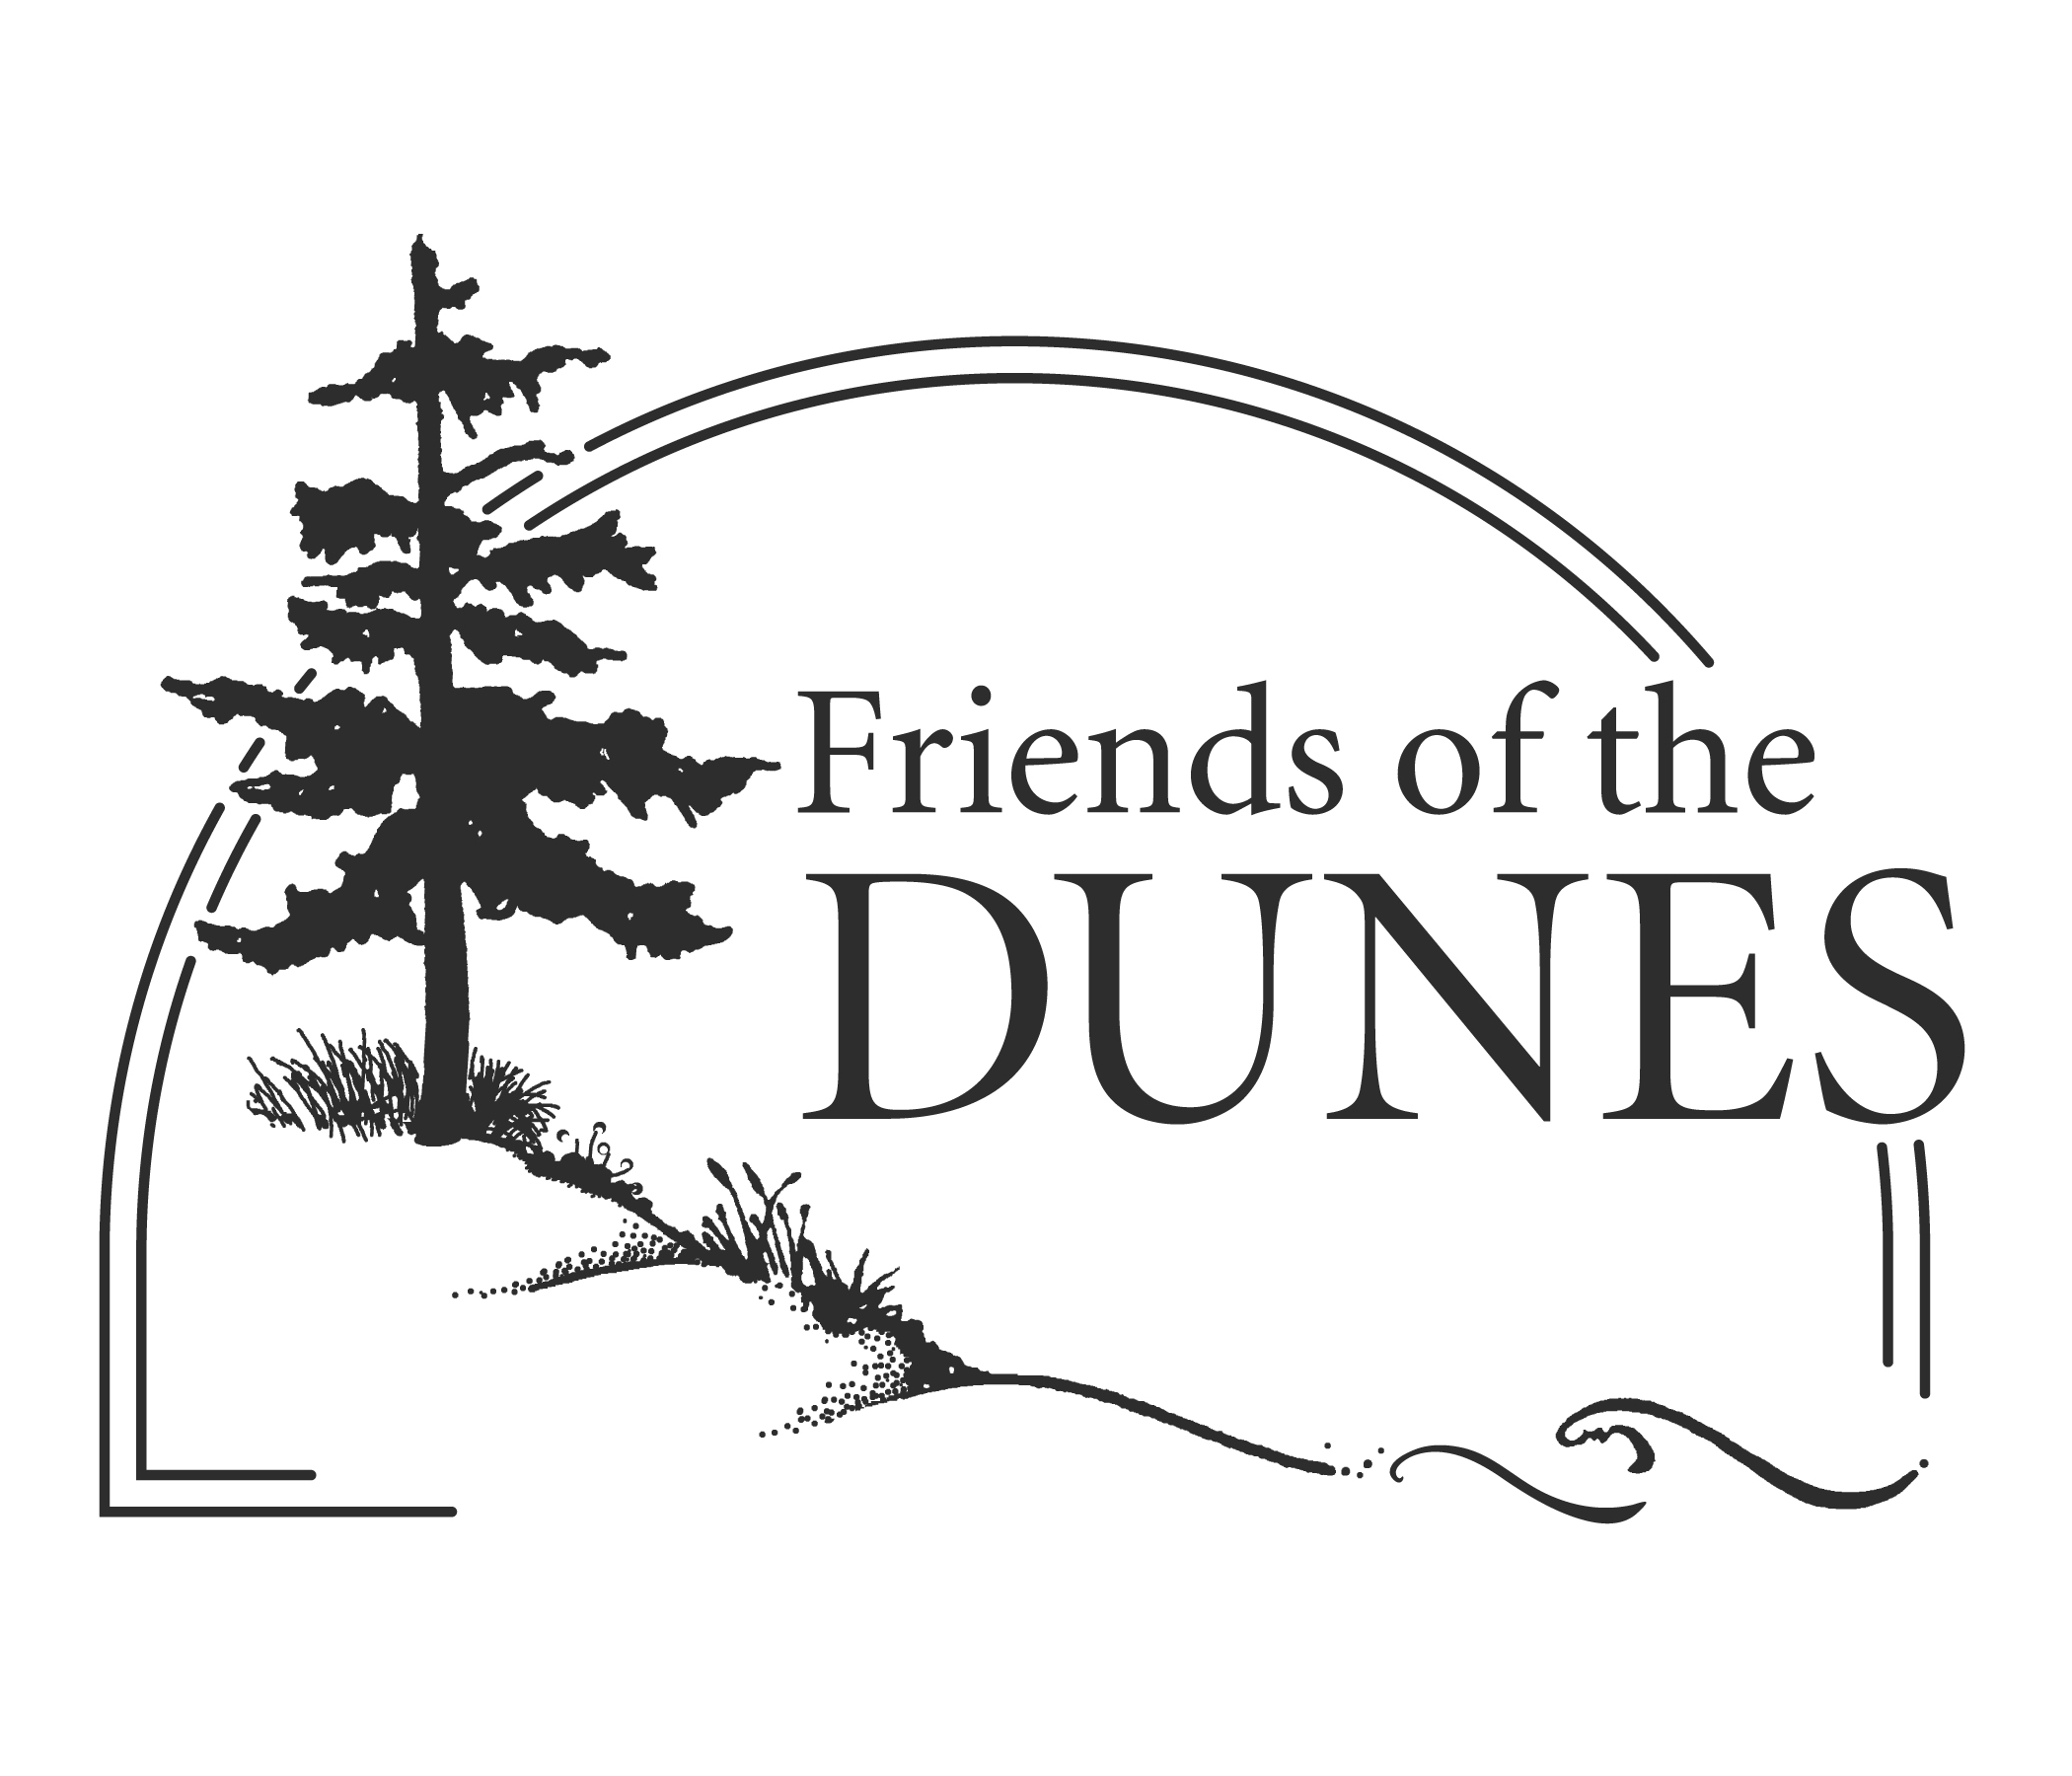 Friends of the Dunes